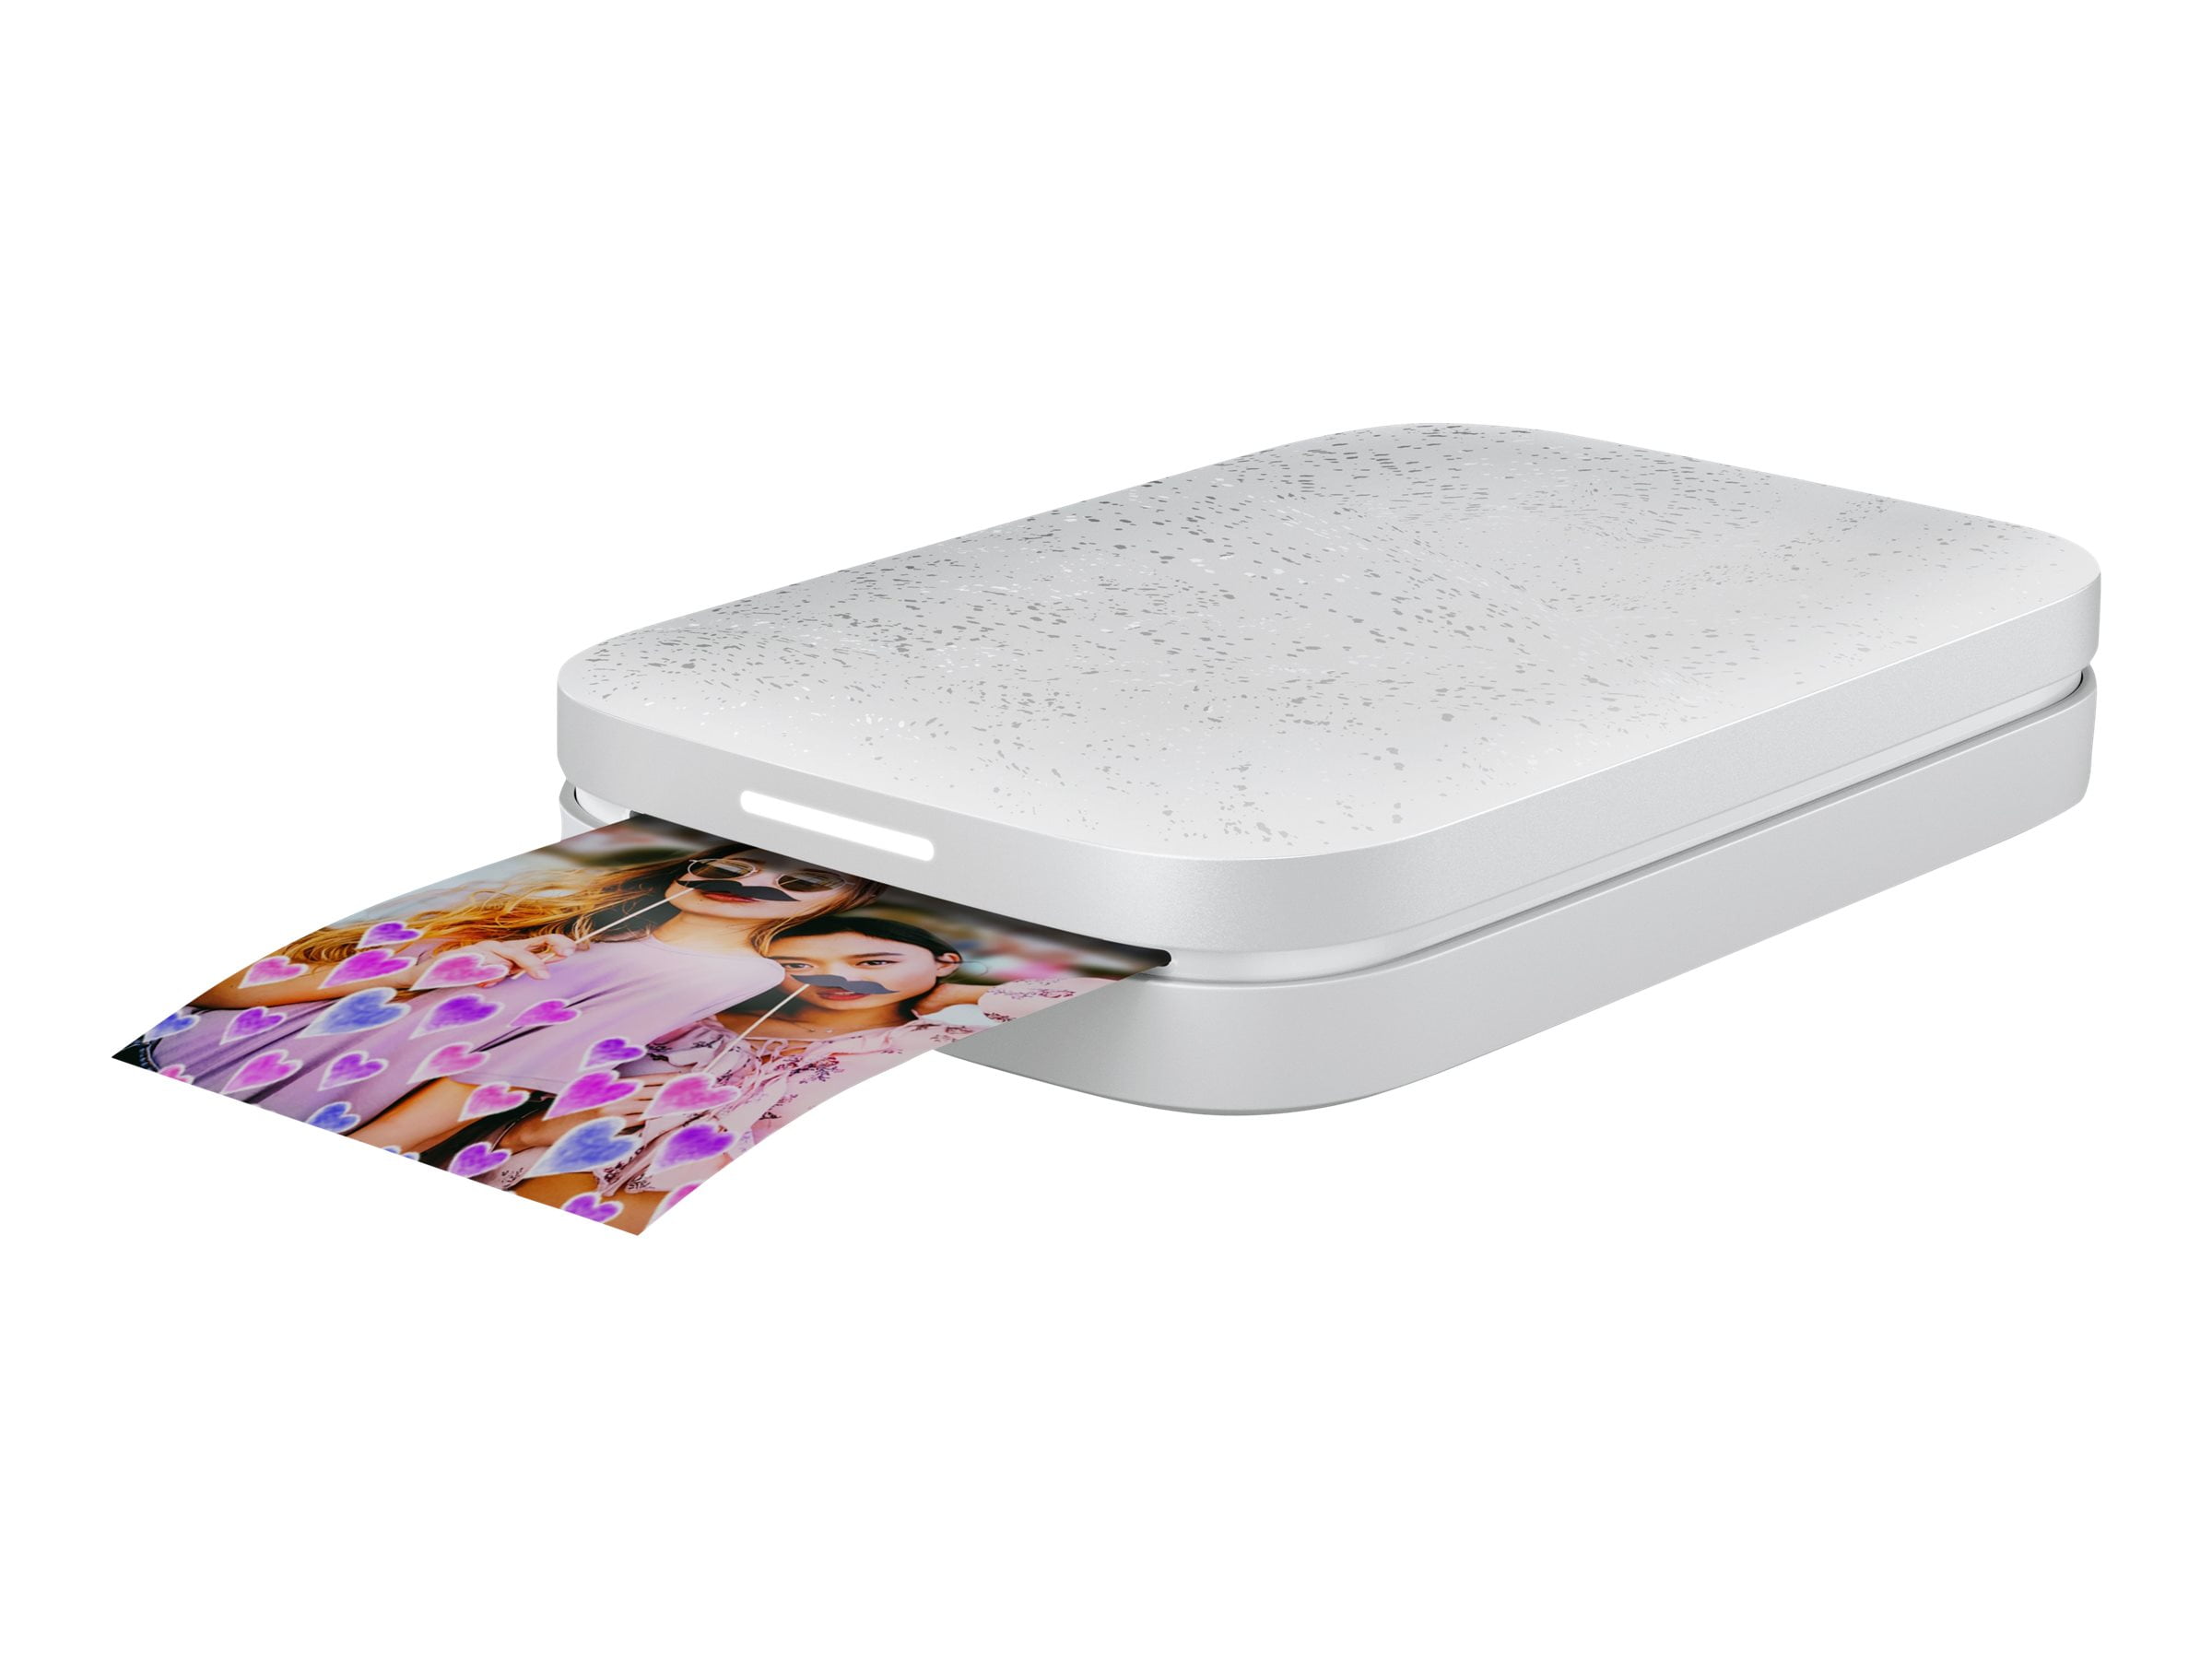 HP Sprocket Portable Photo Printer (Luna White) – Instantly Print 2x3” Sticky-backed from Your Phone